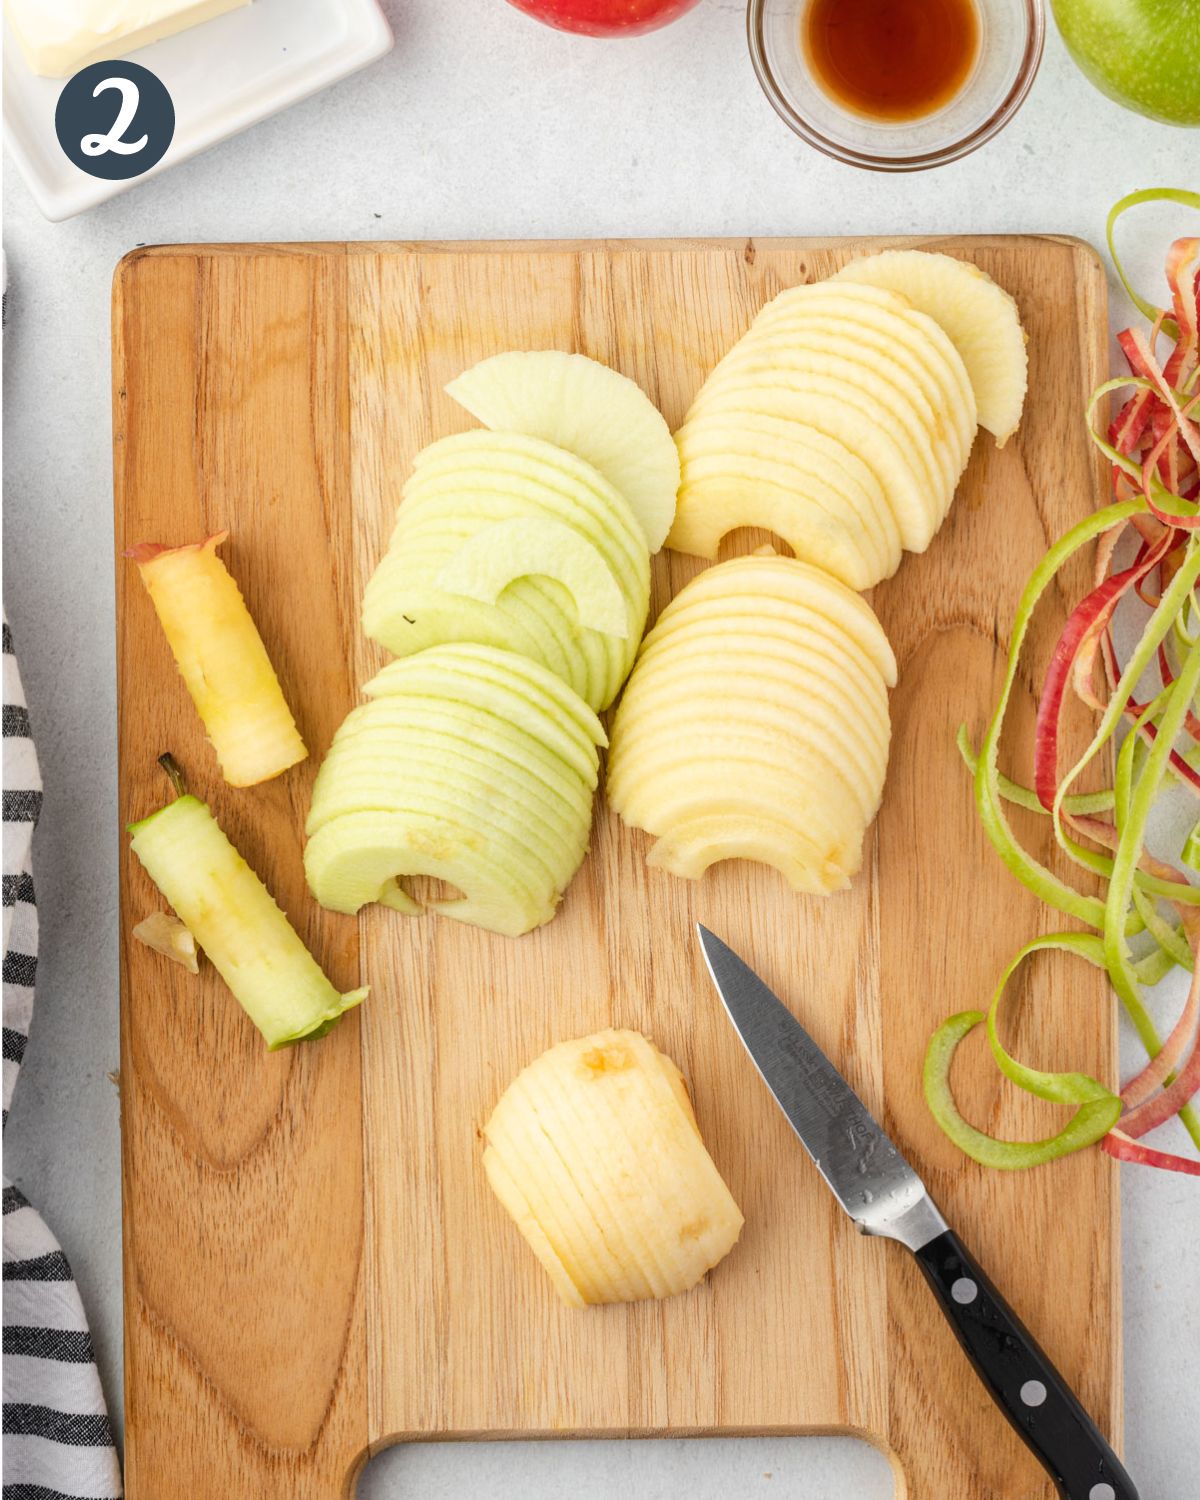 Two peeled apples sliced on a wooden cutting board.